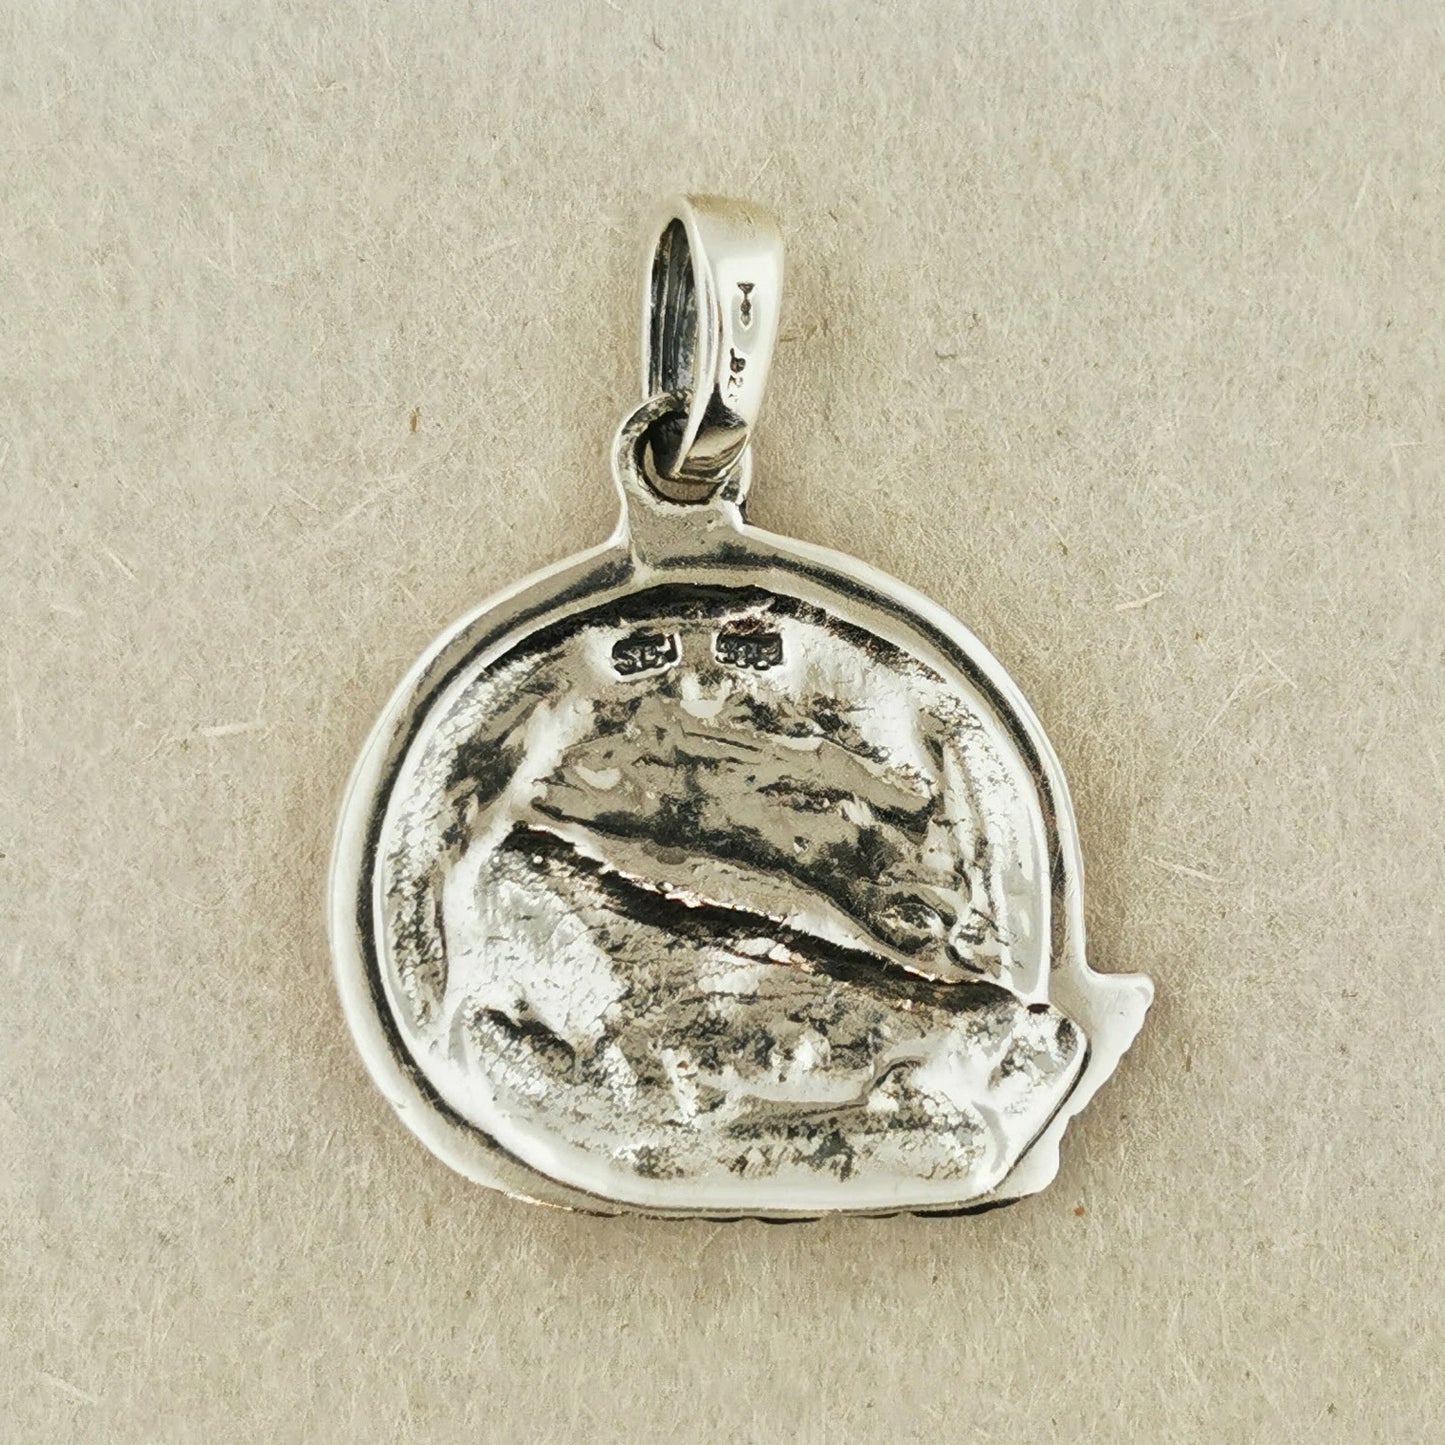 Howling Wolf and Moon Pendant in 925 Silver or Bronze, Wolf And Moon Pendant Necklace, Wolf Howling at The Moon Pendant, 925 Wolf Jewelry, Silver Wolf Pendant, Howling Wolf Pendant, Sterling Silver Wolf Pendant, Howling At The Moon Jewellery